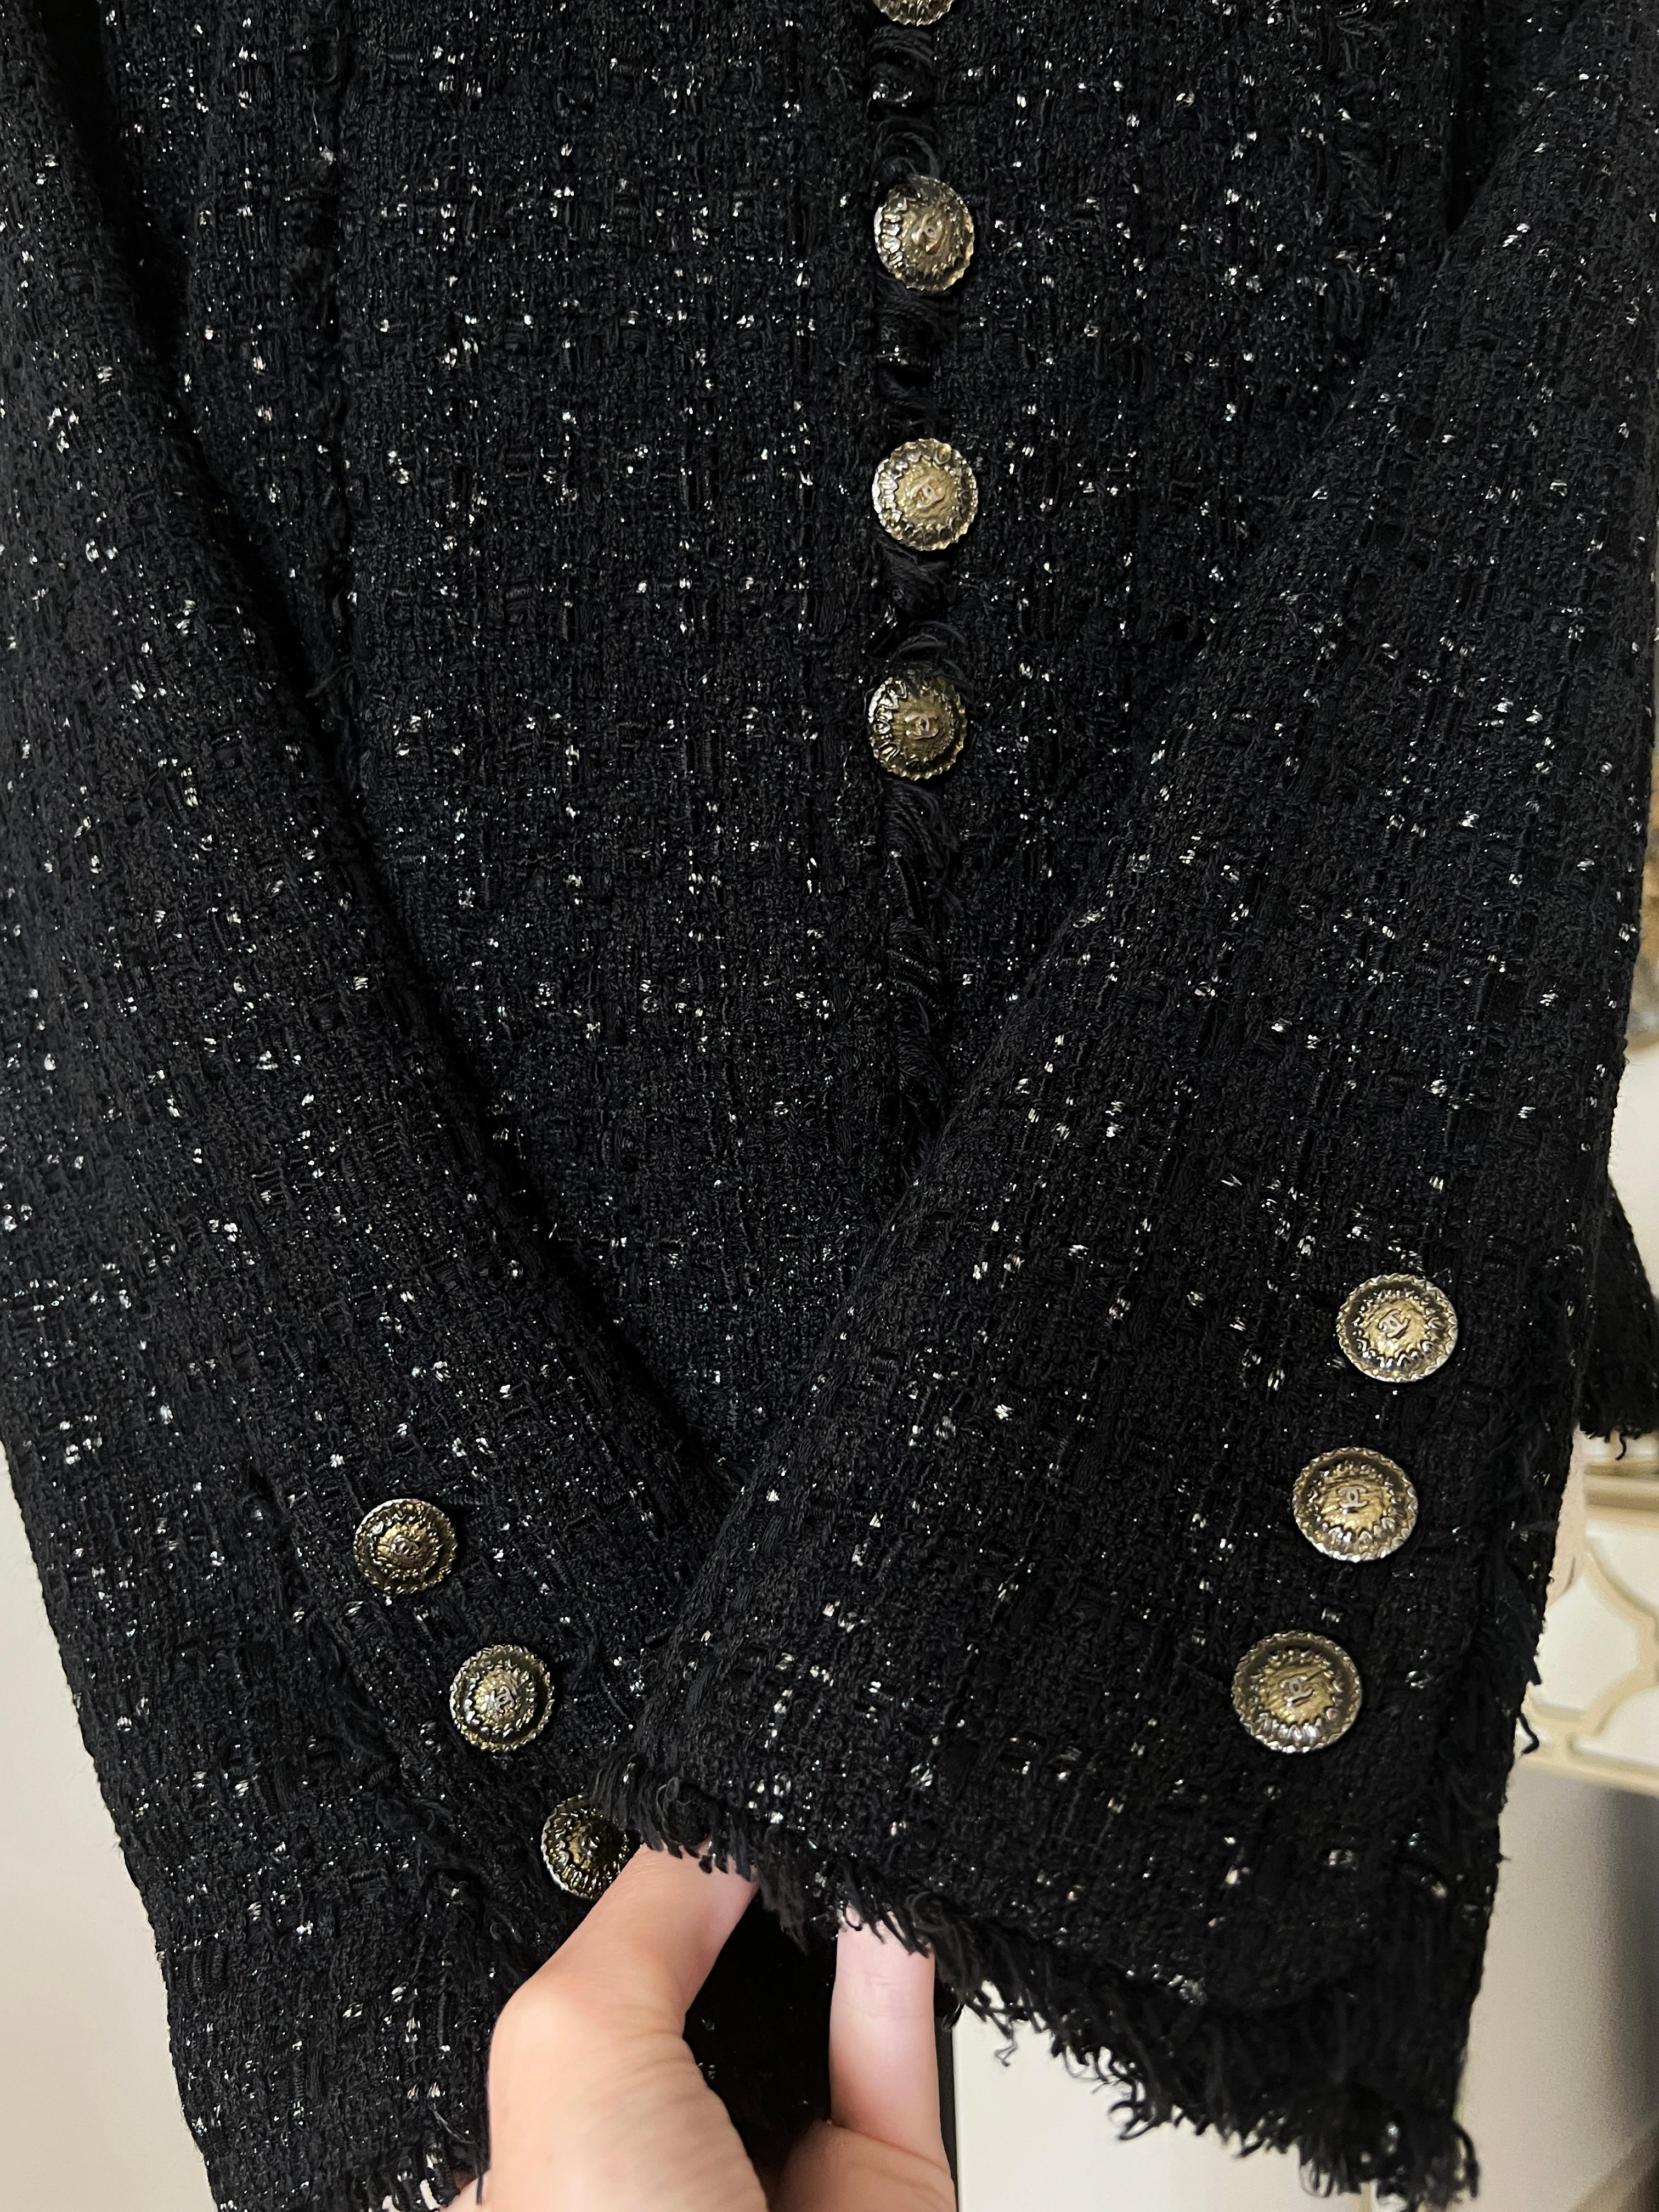 Super rare Chanel black iridescent  tweed jacket with signature diamond quilt details.
 Impossible to find anywhere!
 Retail price was over 8,800€. 
- CC logo gold-tone buttons at front and at cuffs. 
Size mark 44 fr. Condition is pristine.